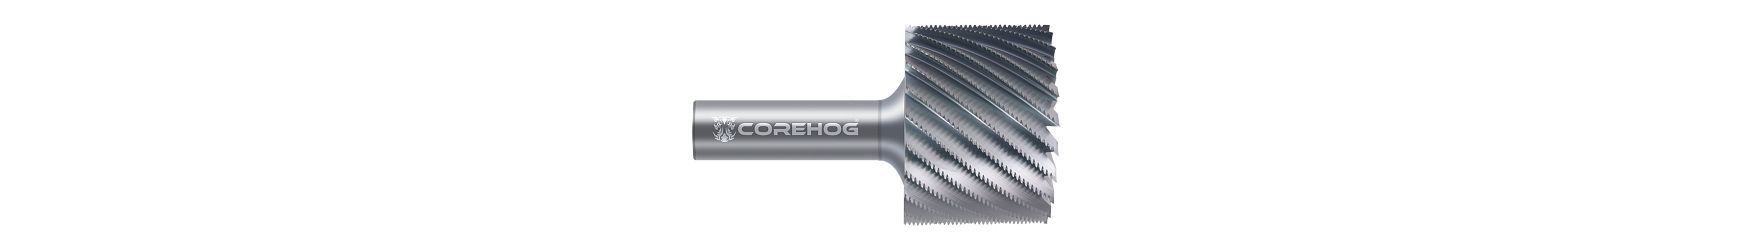 Roughing Core Tools-CoreHoggers-Square-Reduced Shank